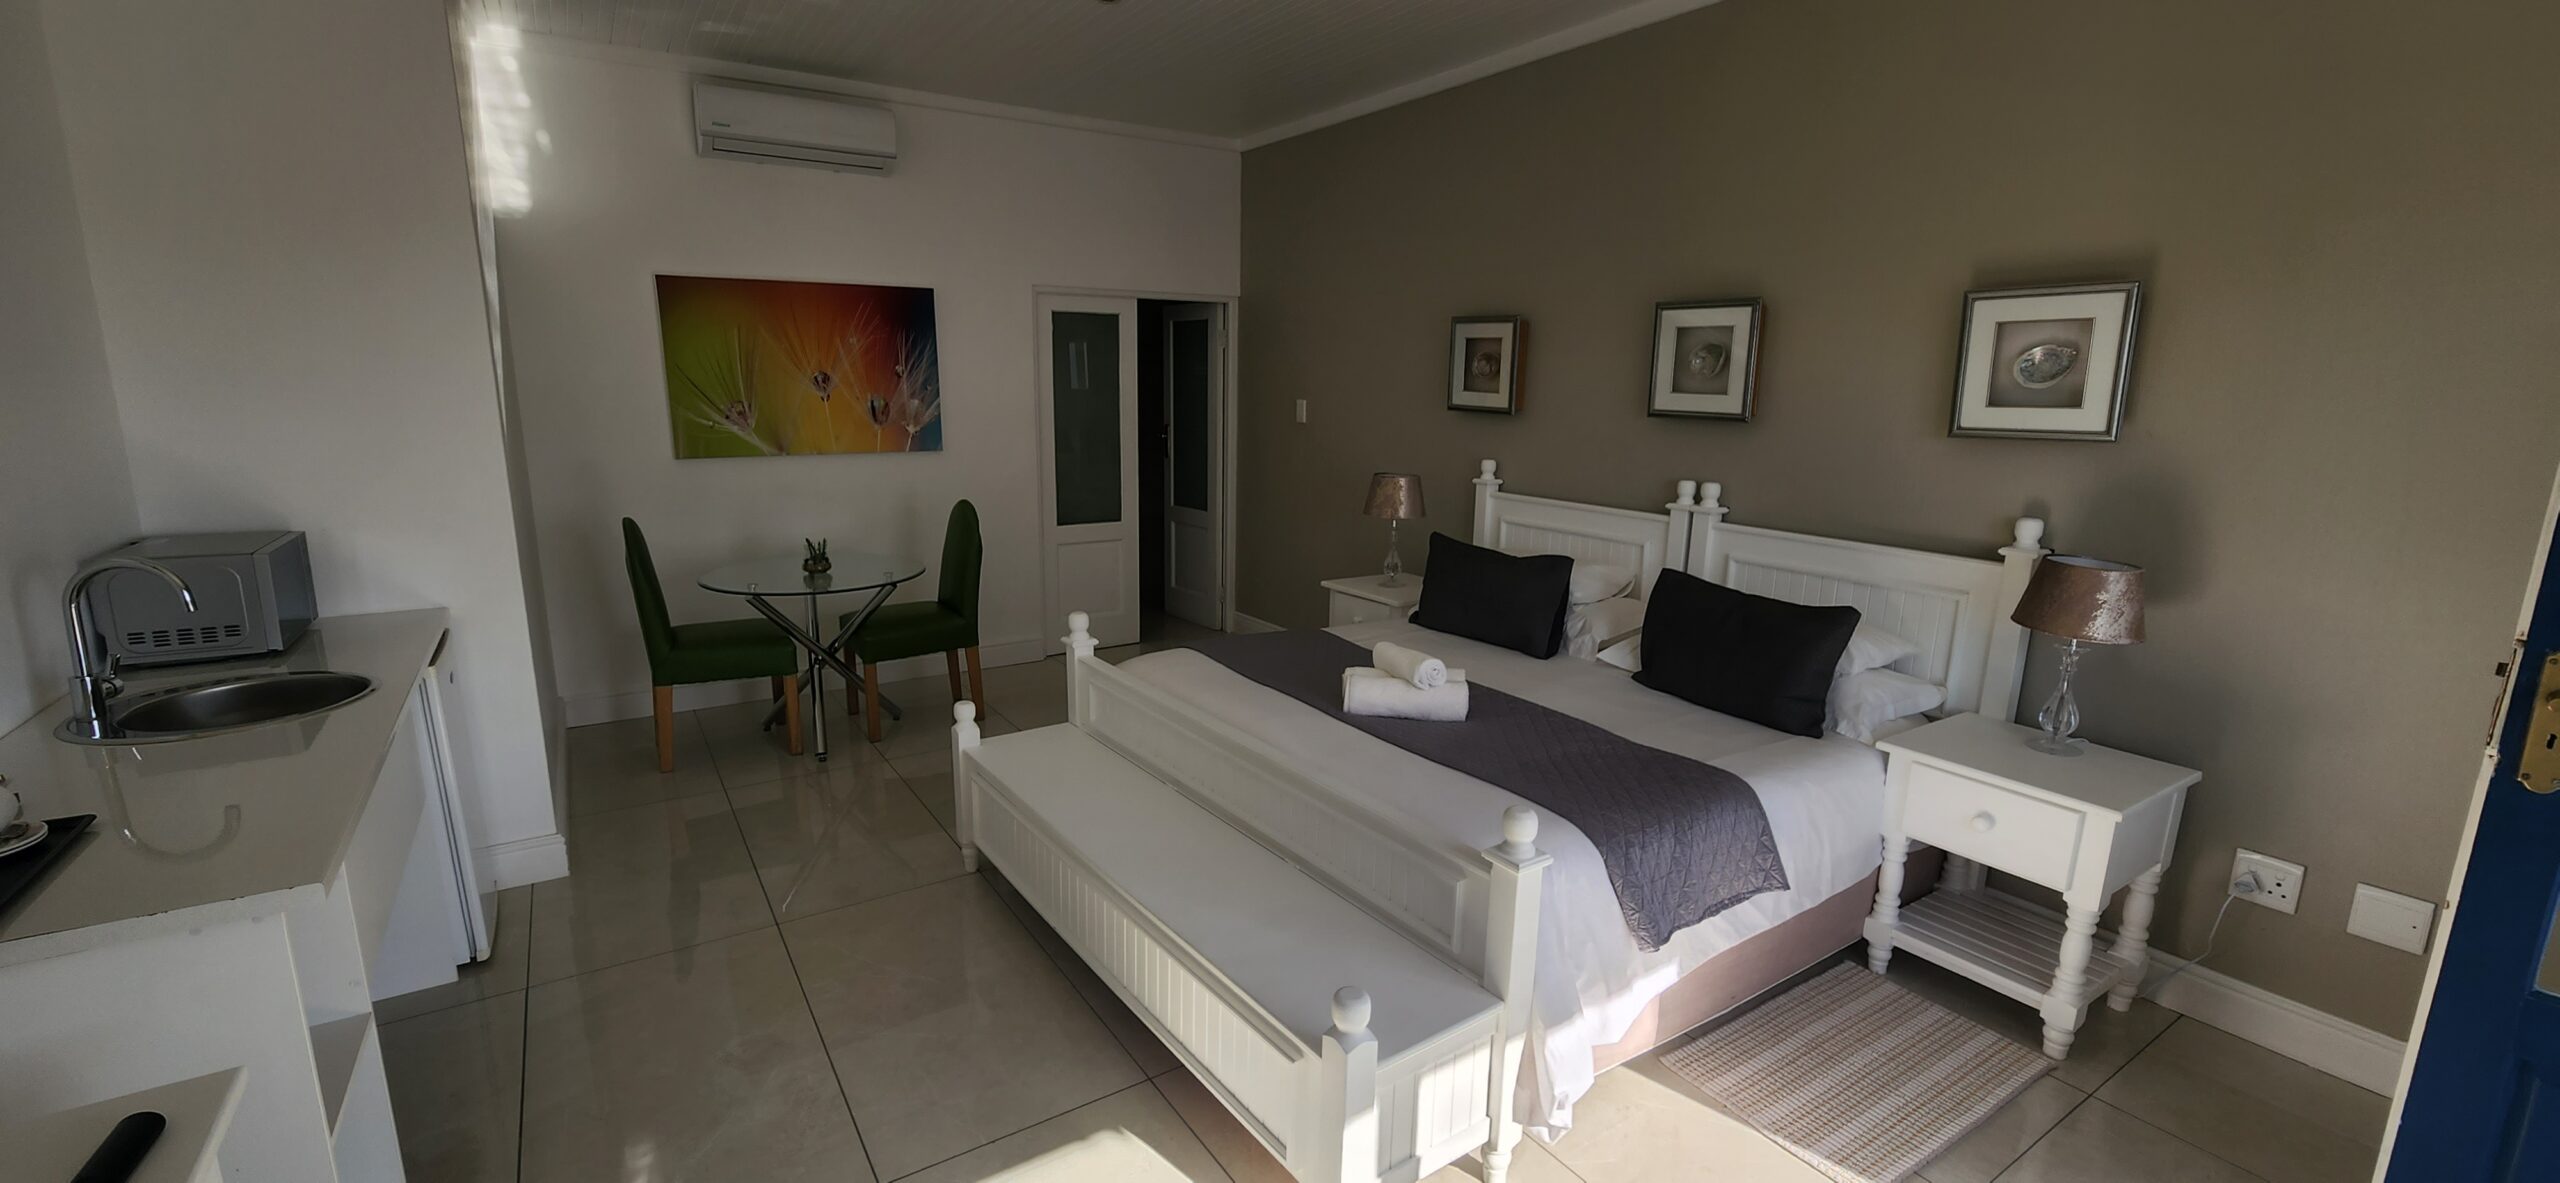 The Best West Coast Accommodation at Paternoster Lodge